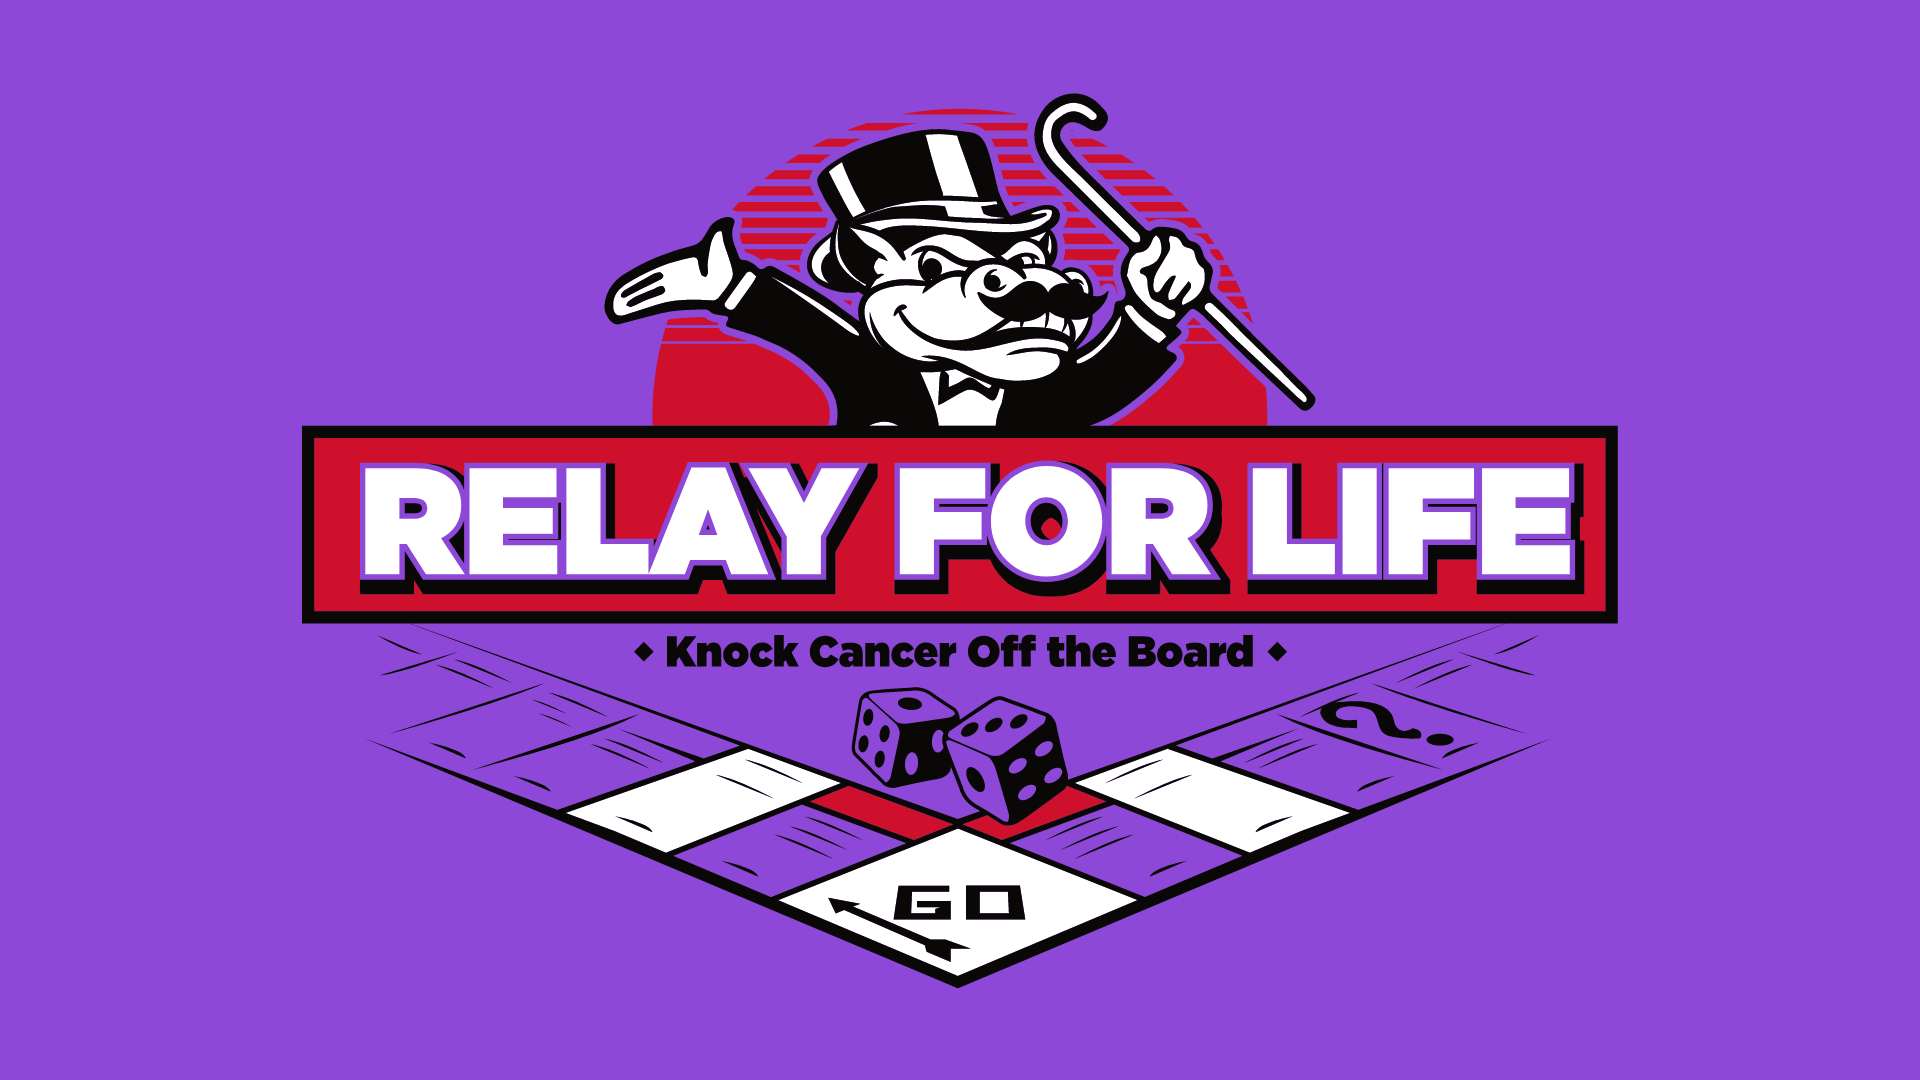 Relay for Life: Knock Cancer off the Board logo